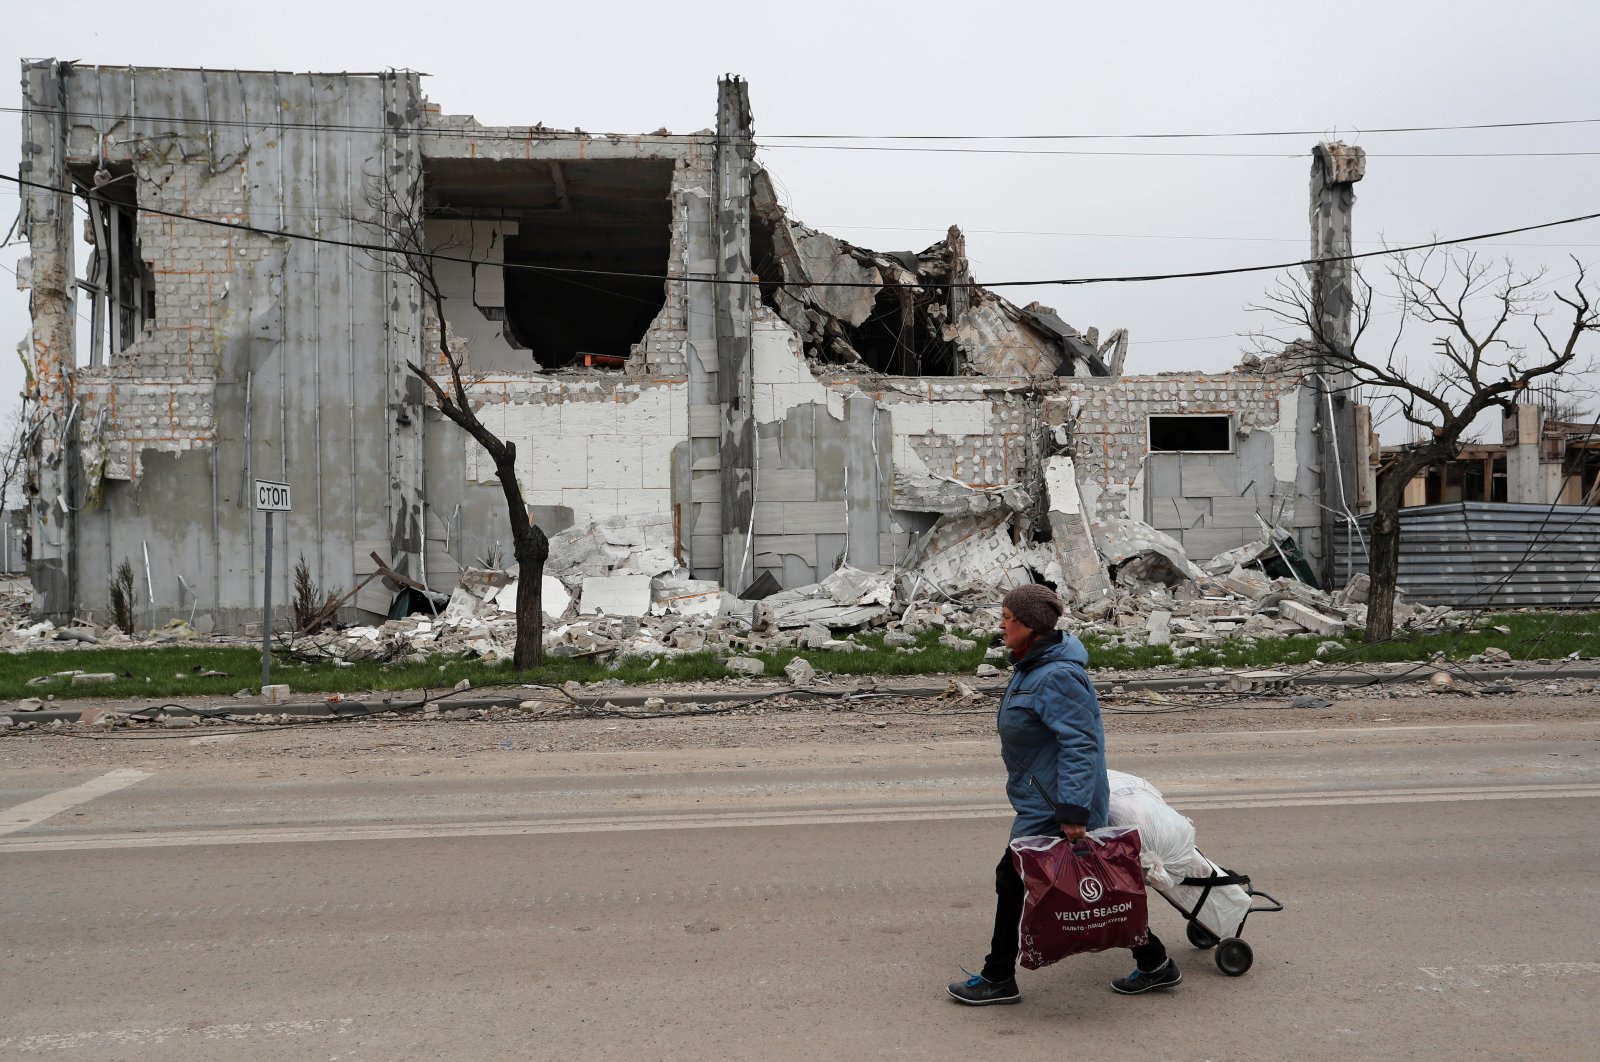 A local resident walks past a building destroyed during the Ukraine-Russia conflict in the southern port city of Mariupol, Ukraine, April 19, 2022. (Reuters Photo)